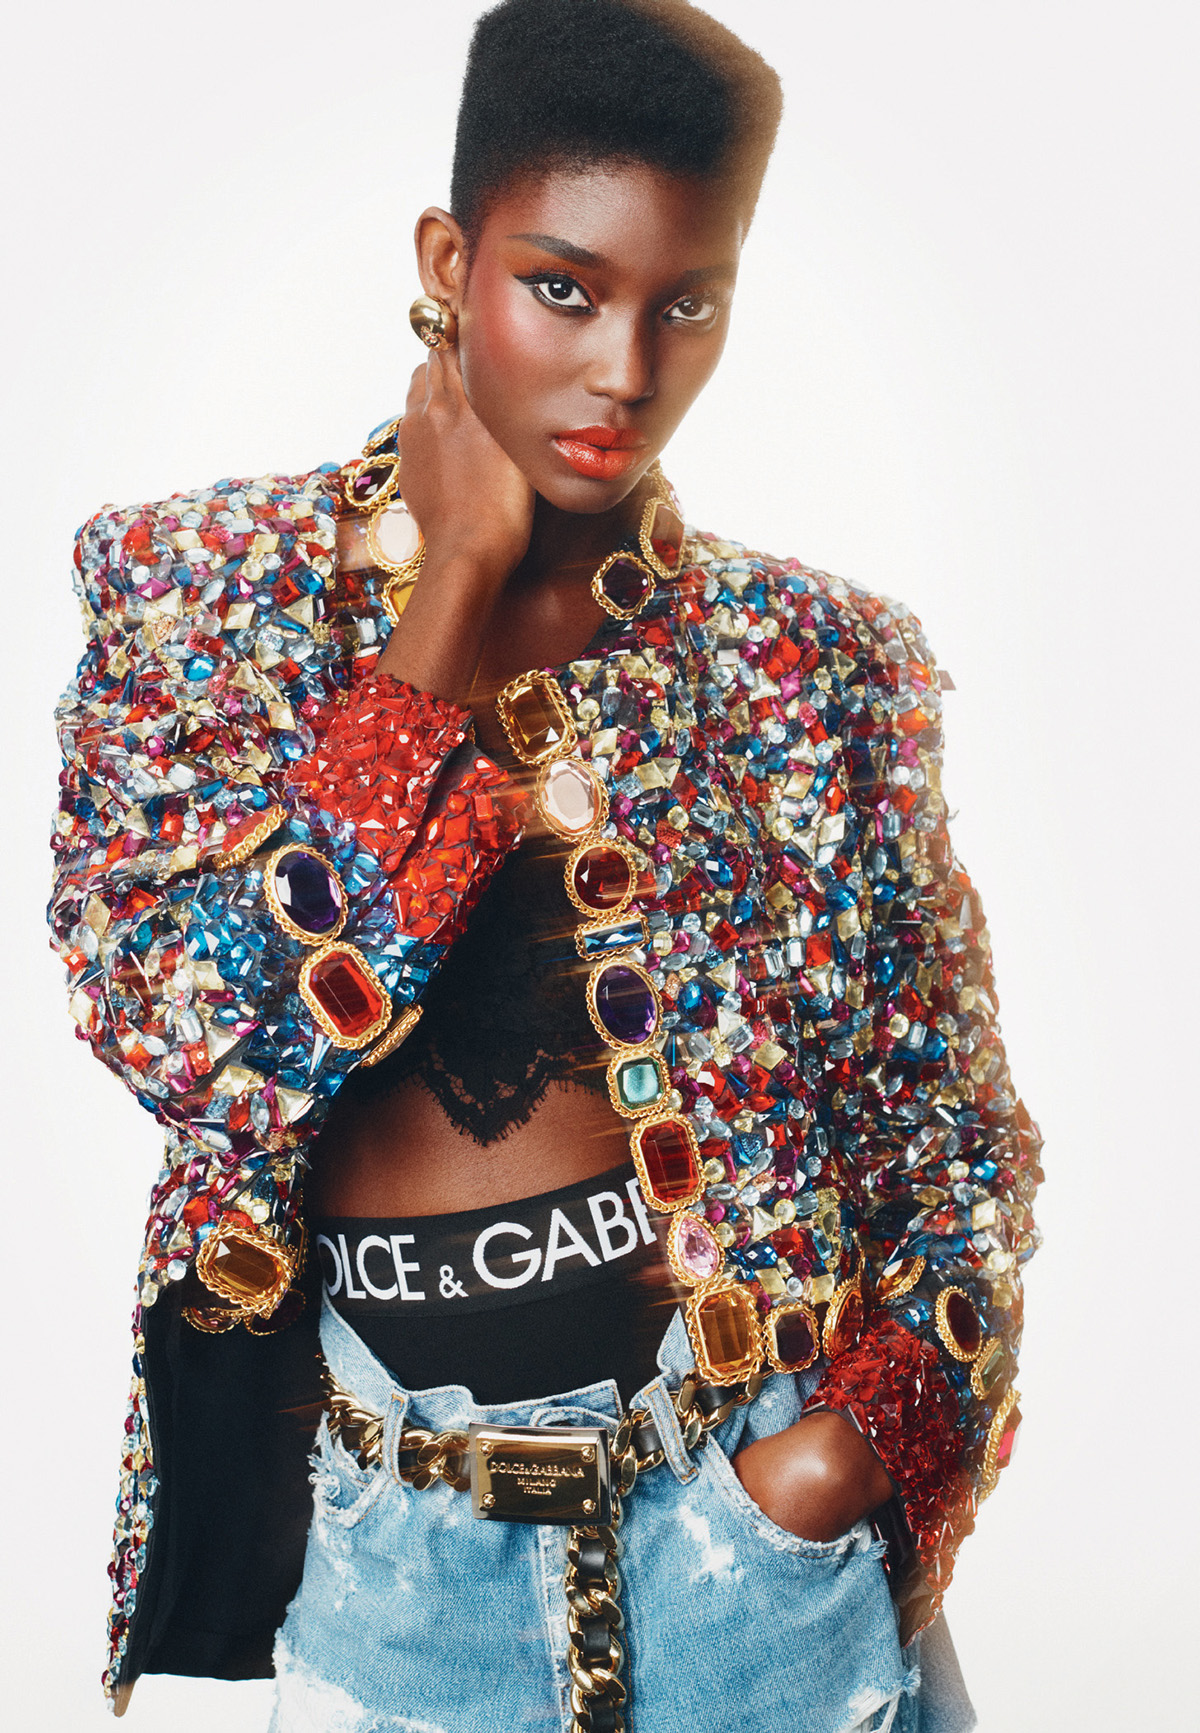 ''Glam Rocks'' by Scott Trindle for British Vogue February 2022